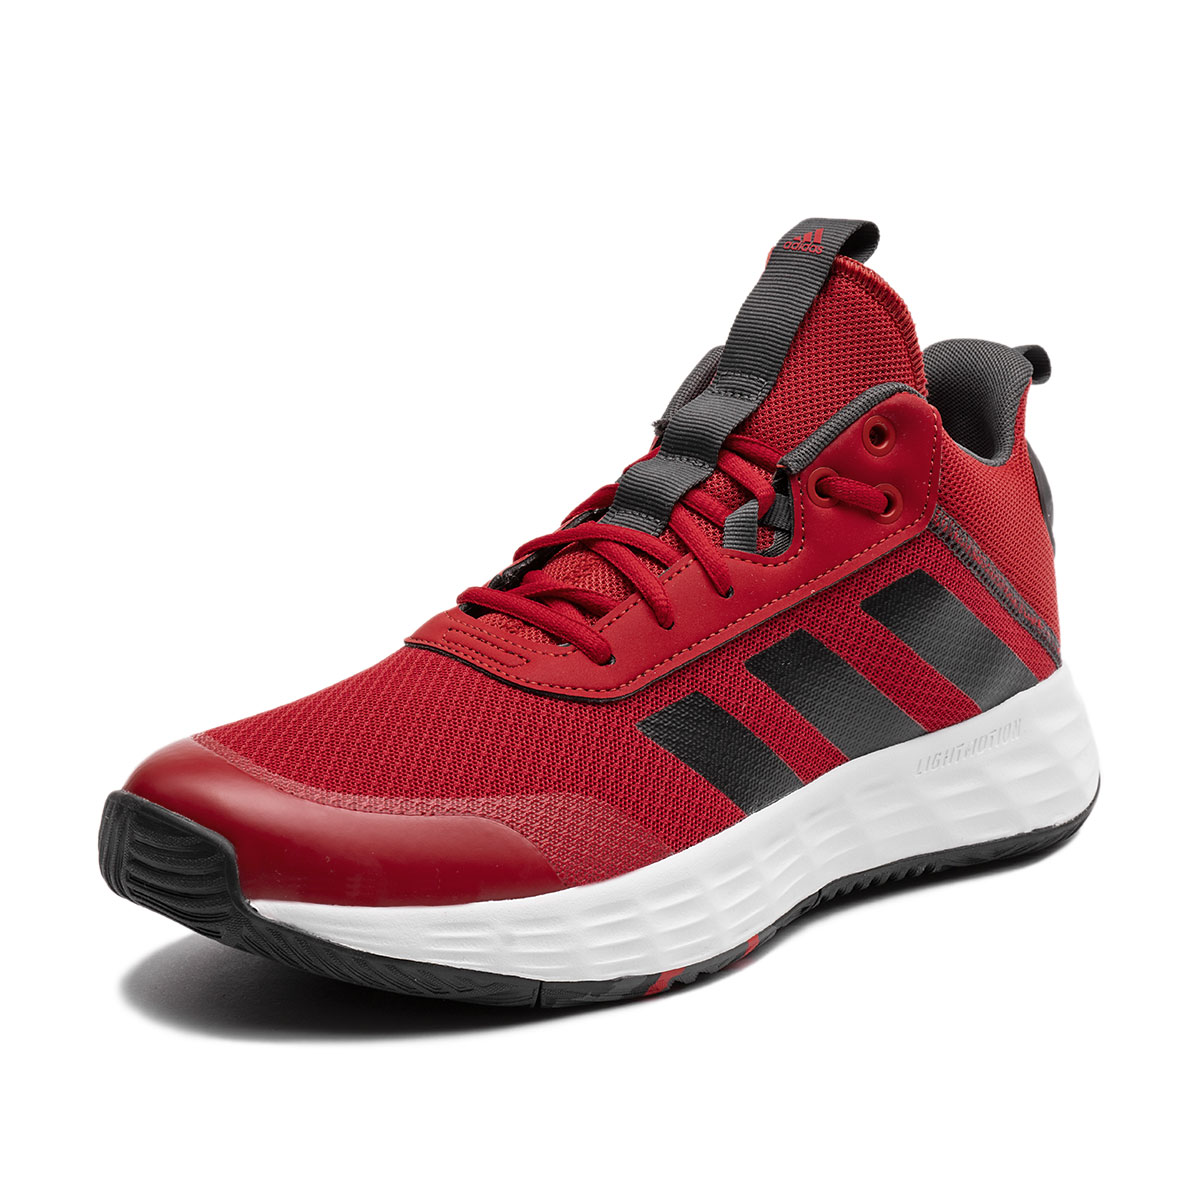 adidas Ownthegame 2.0  H00466